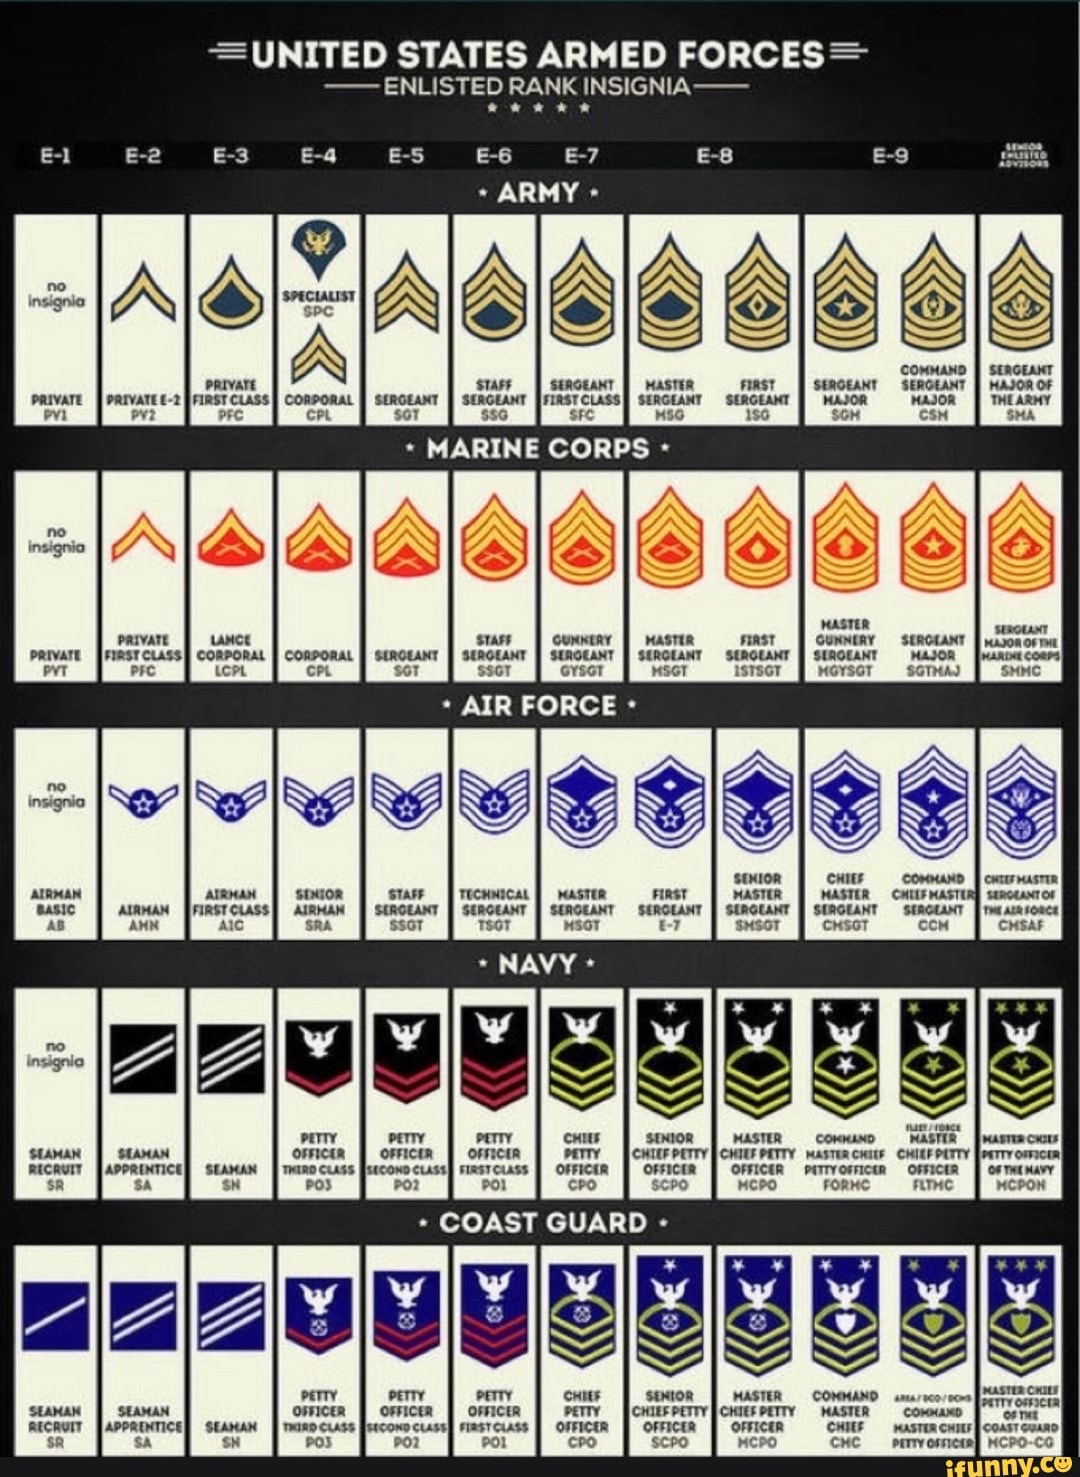 UNITED STATES ARMED FORCES E-S ENLISTED RANK INSIGNIA-- ARMY AA COMMAND ...